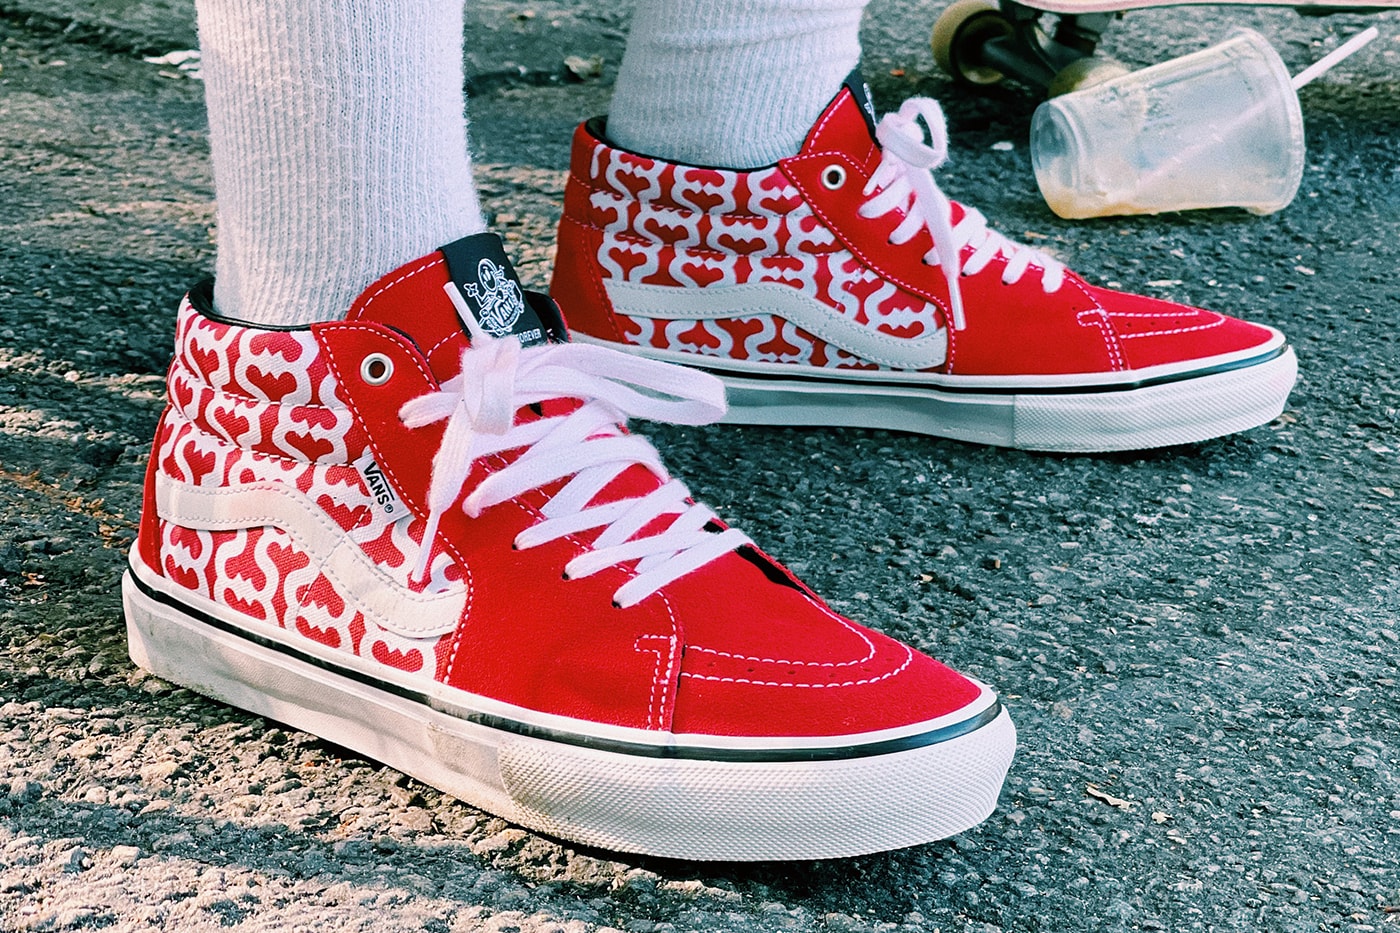 supreme vans spring 2021 sneakers collaboration skate grosso mid red